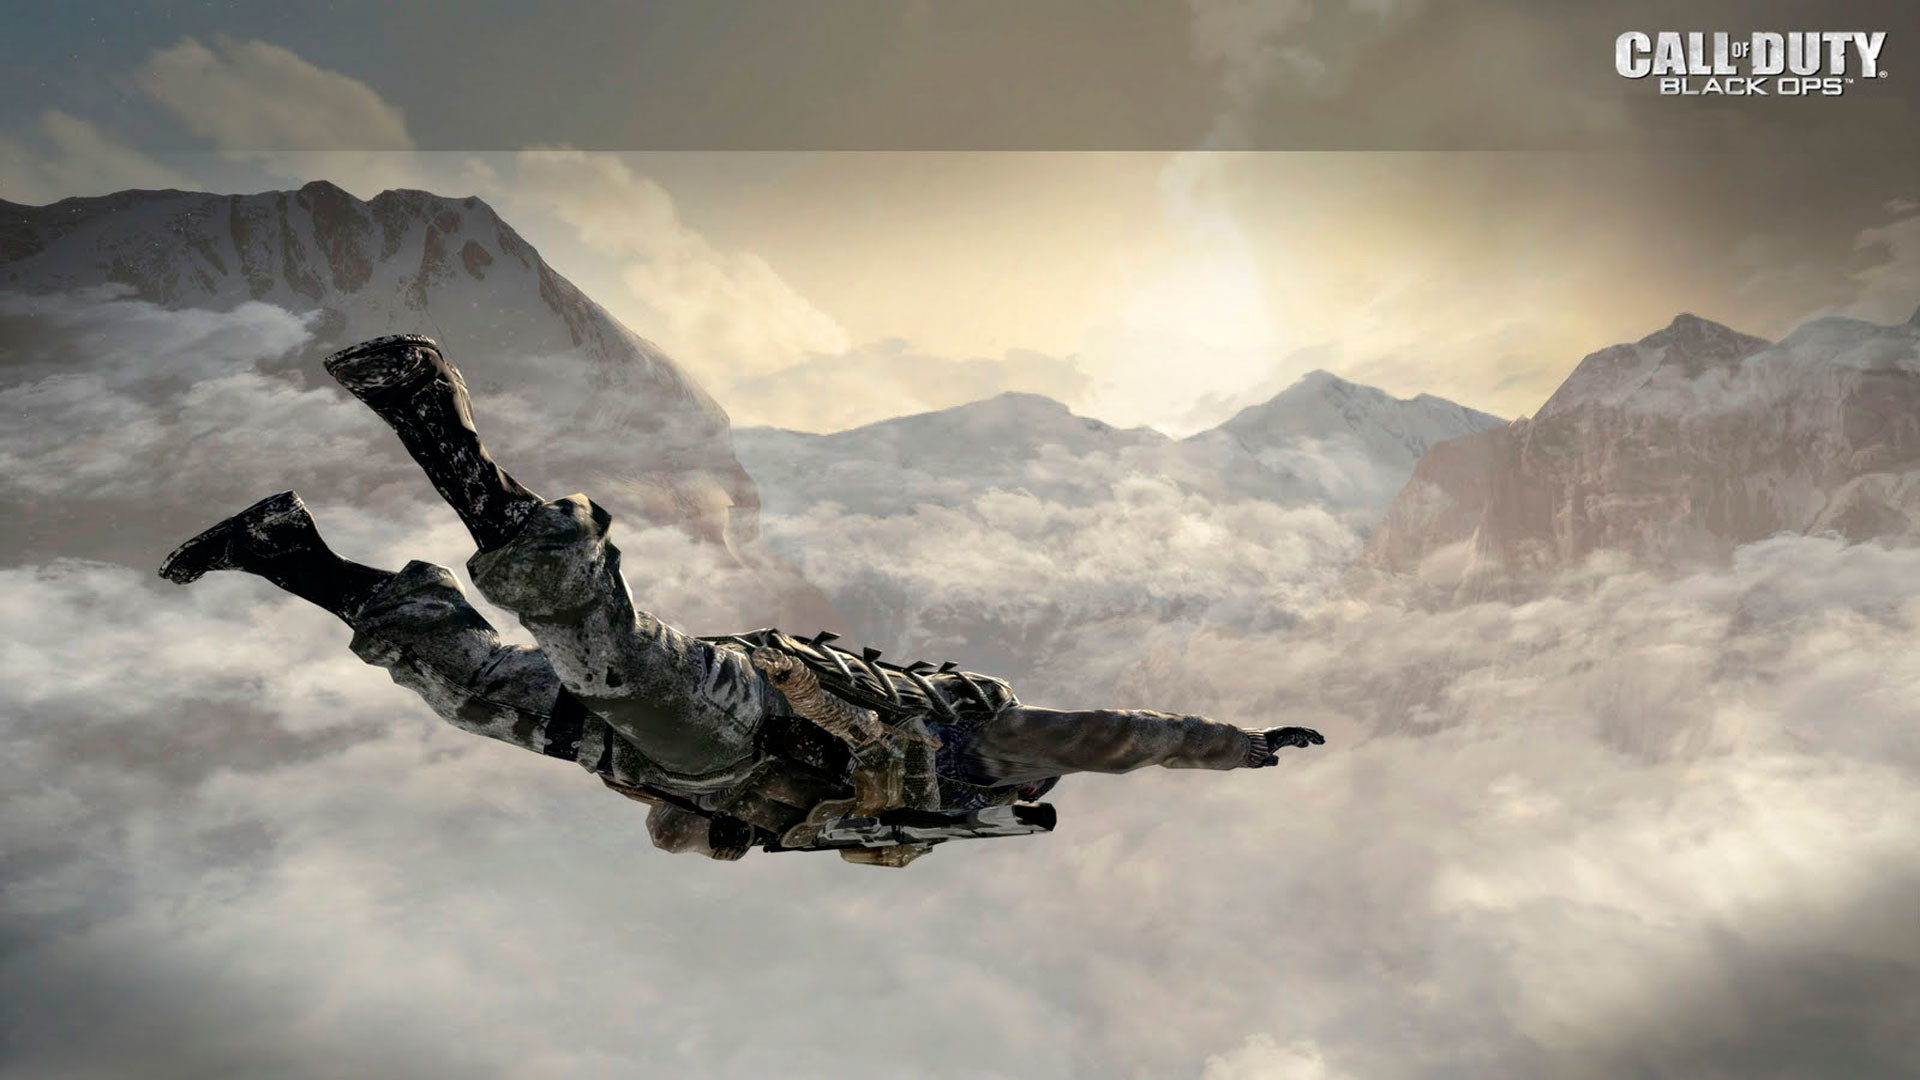 Call of Duty Black Ops 1080p Wallpaper …